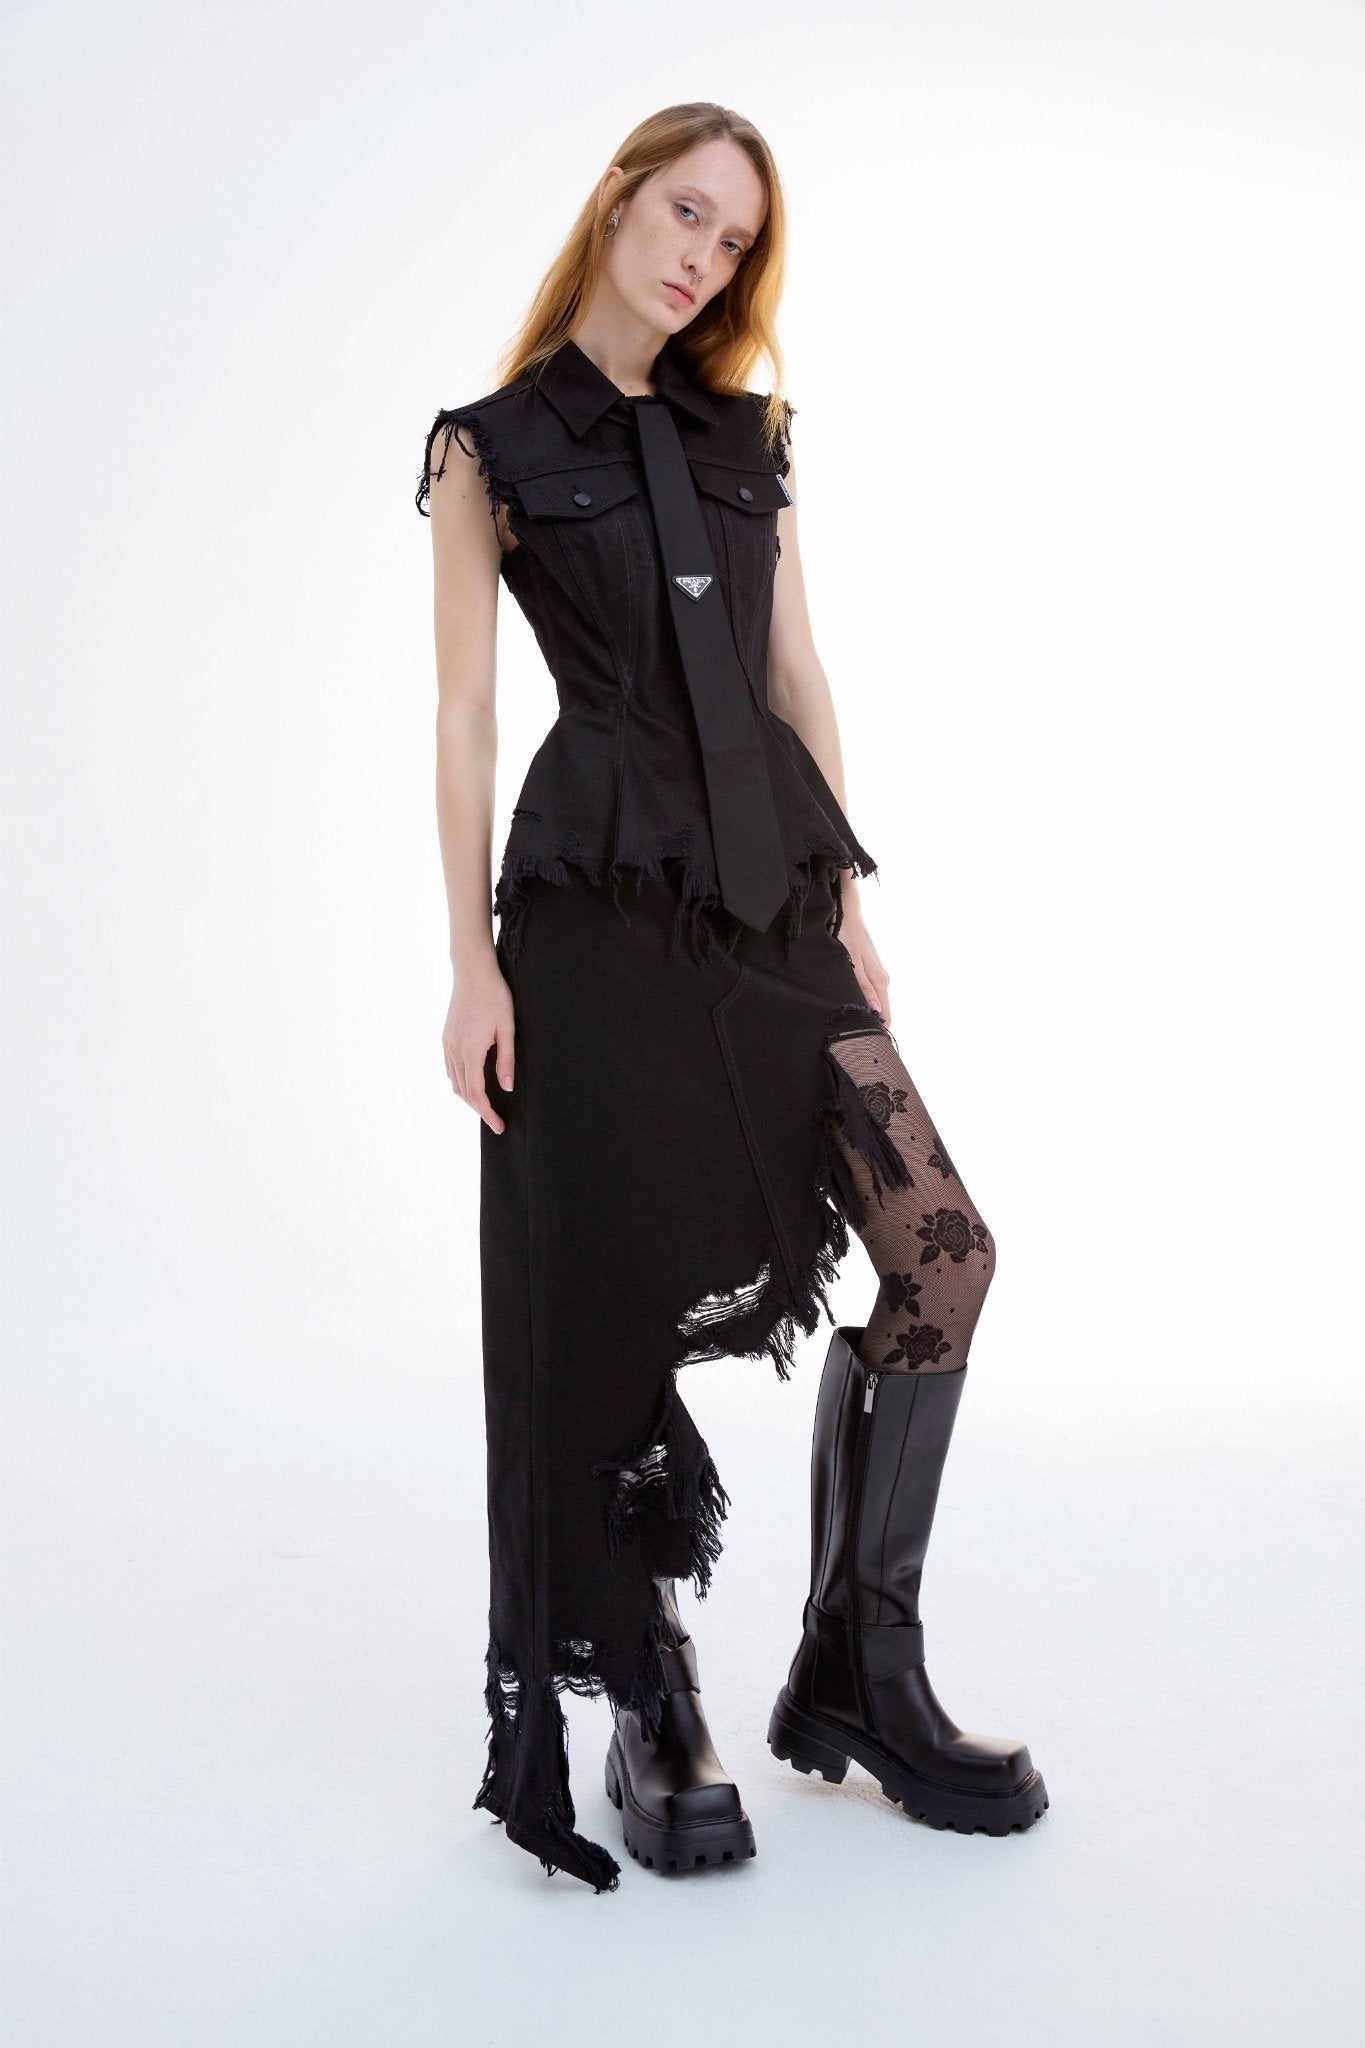 LOST IN ECHO Black Square Toe Knee High Boots | MADA IN CHINA